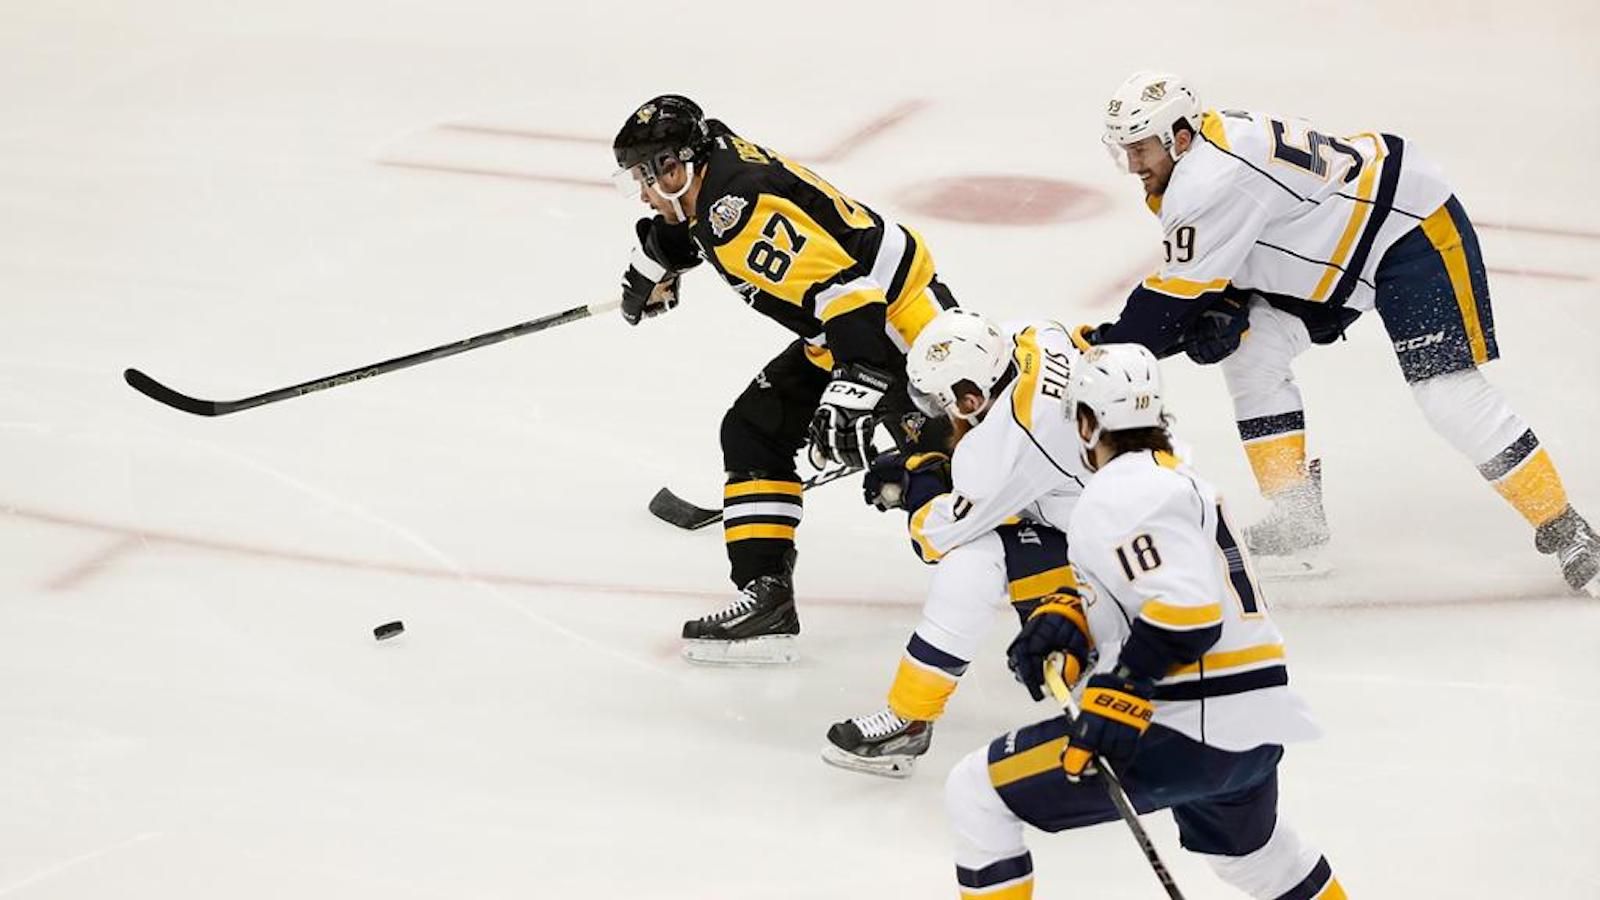 Stanley Cup Final: Sidney Crosby set the tone, Penguins followed to win